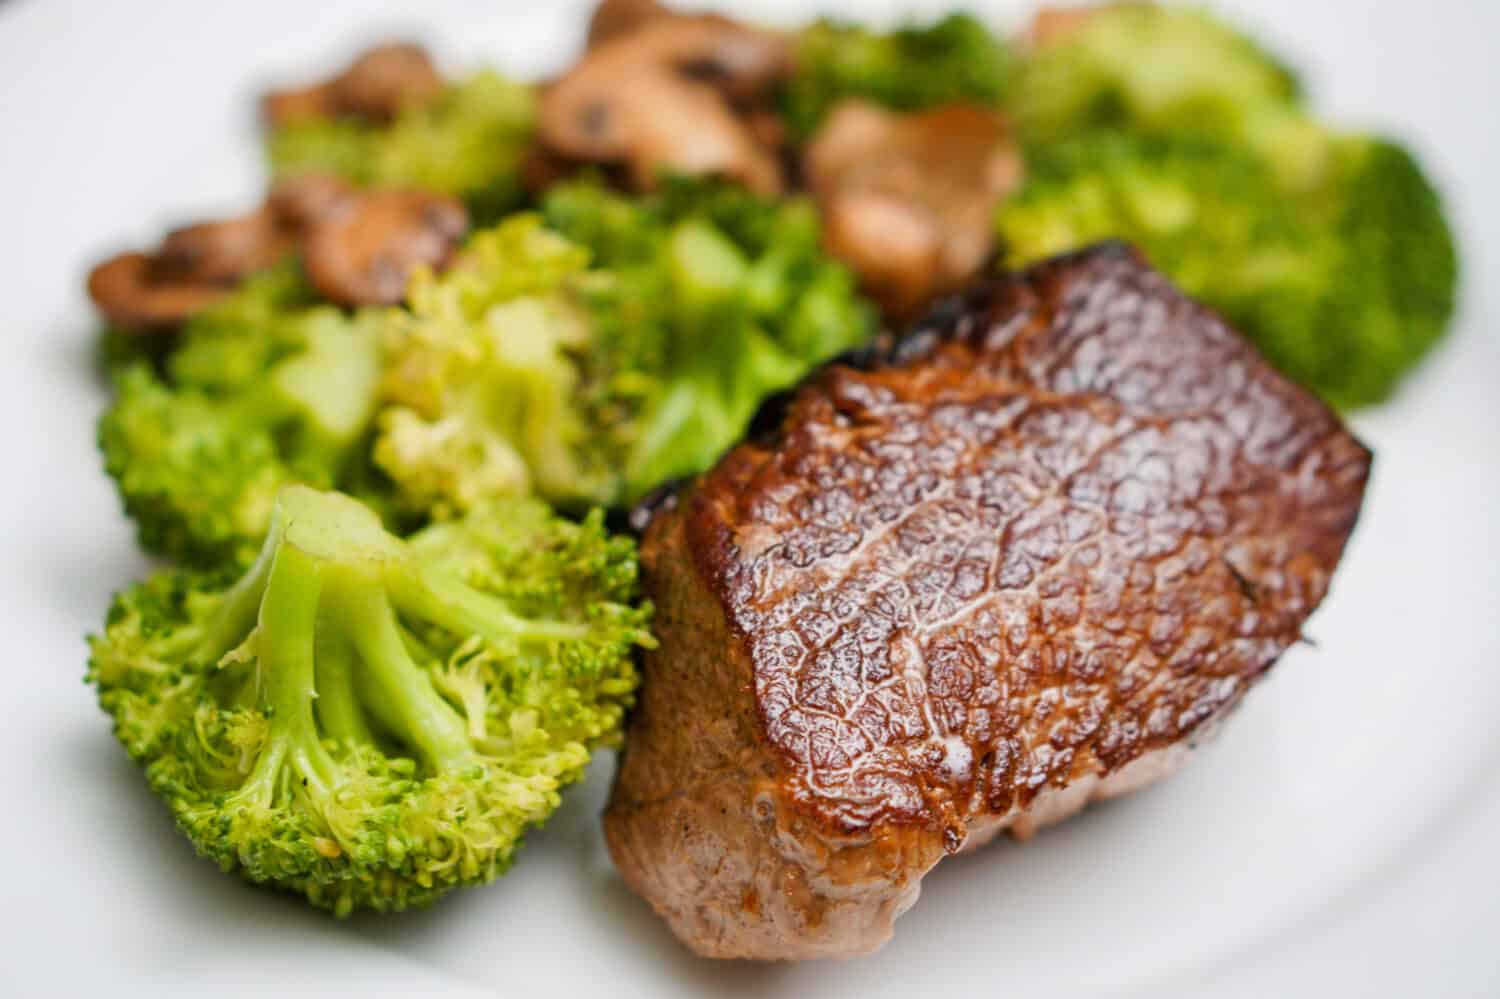 Top Sirloin Beef Steak Cooked Medium Rare Served with Steamed Broccoli